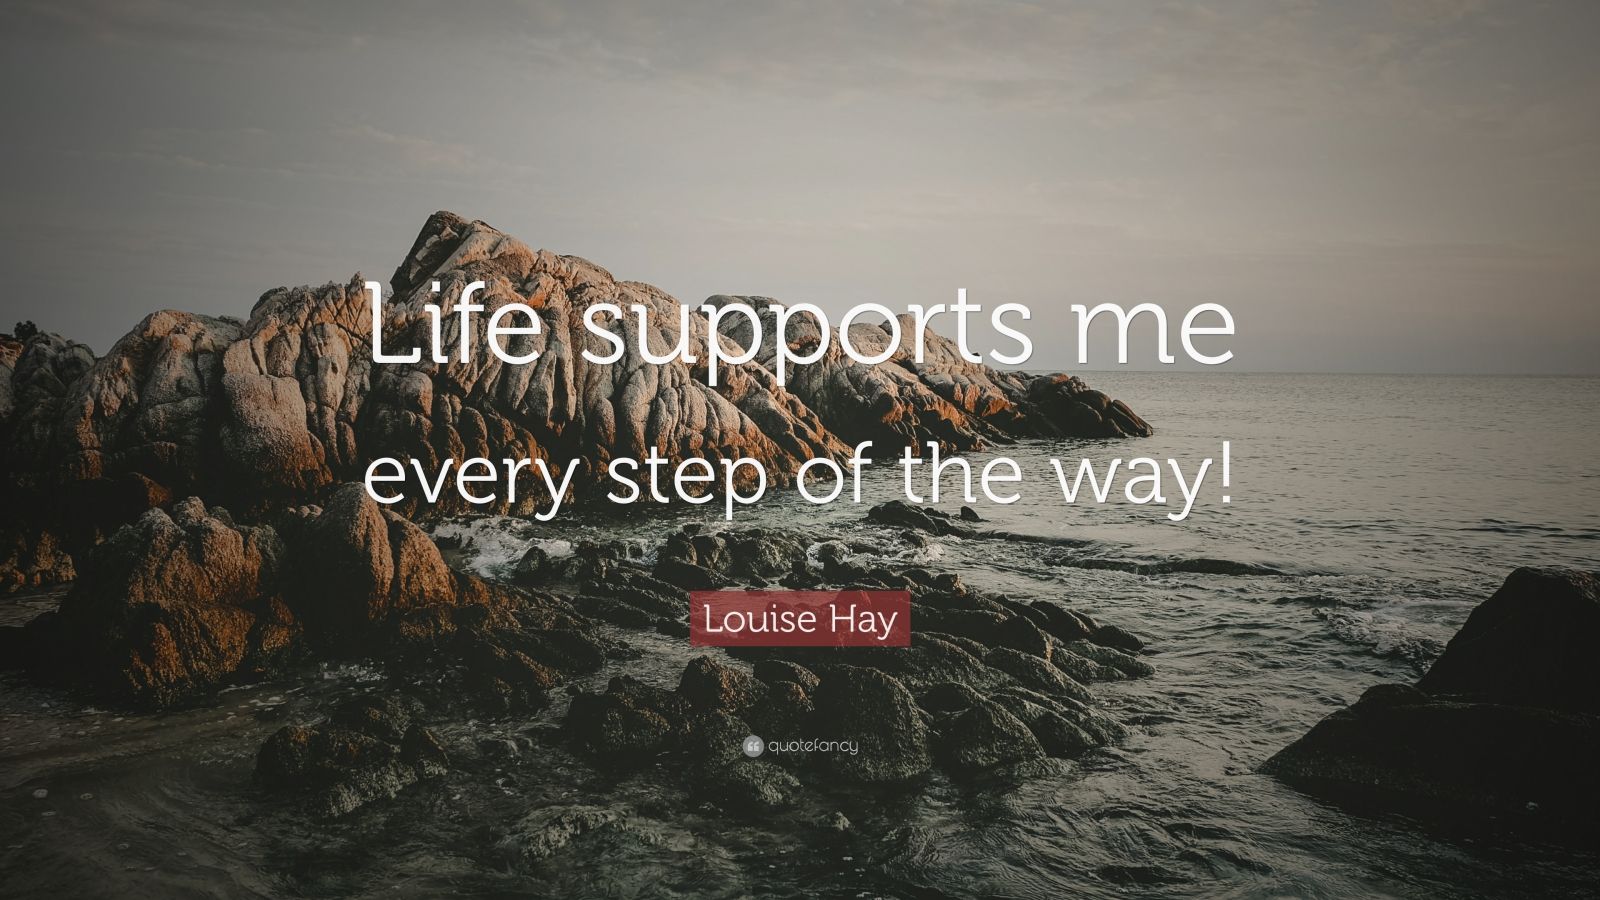 Louise Hay Quote “life Supports Me Every Step Of The Way” 7